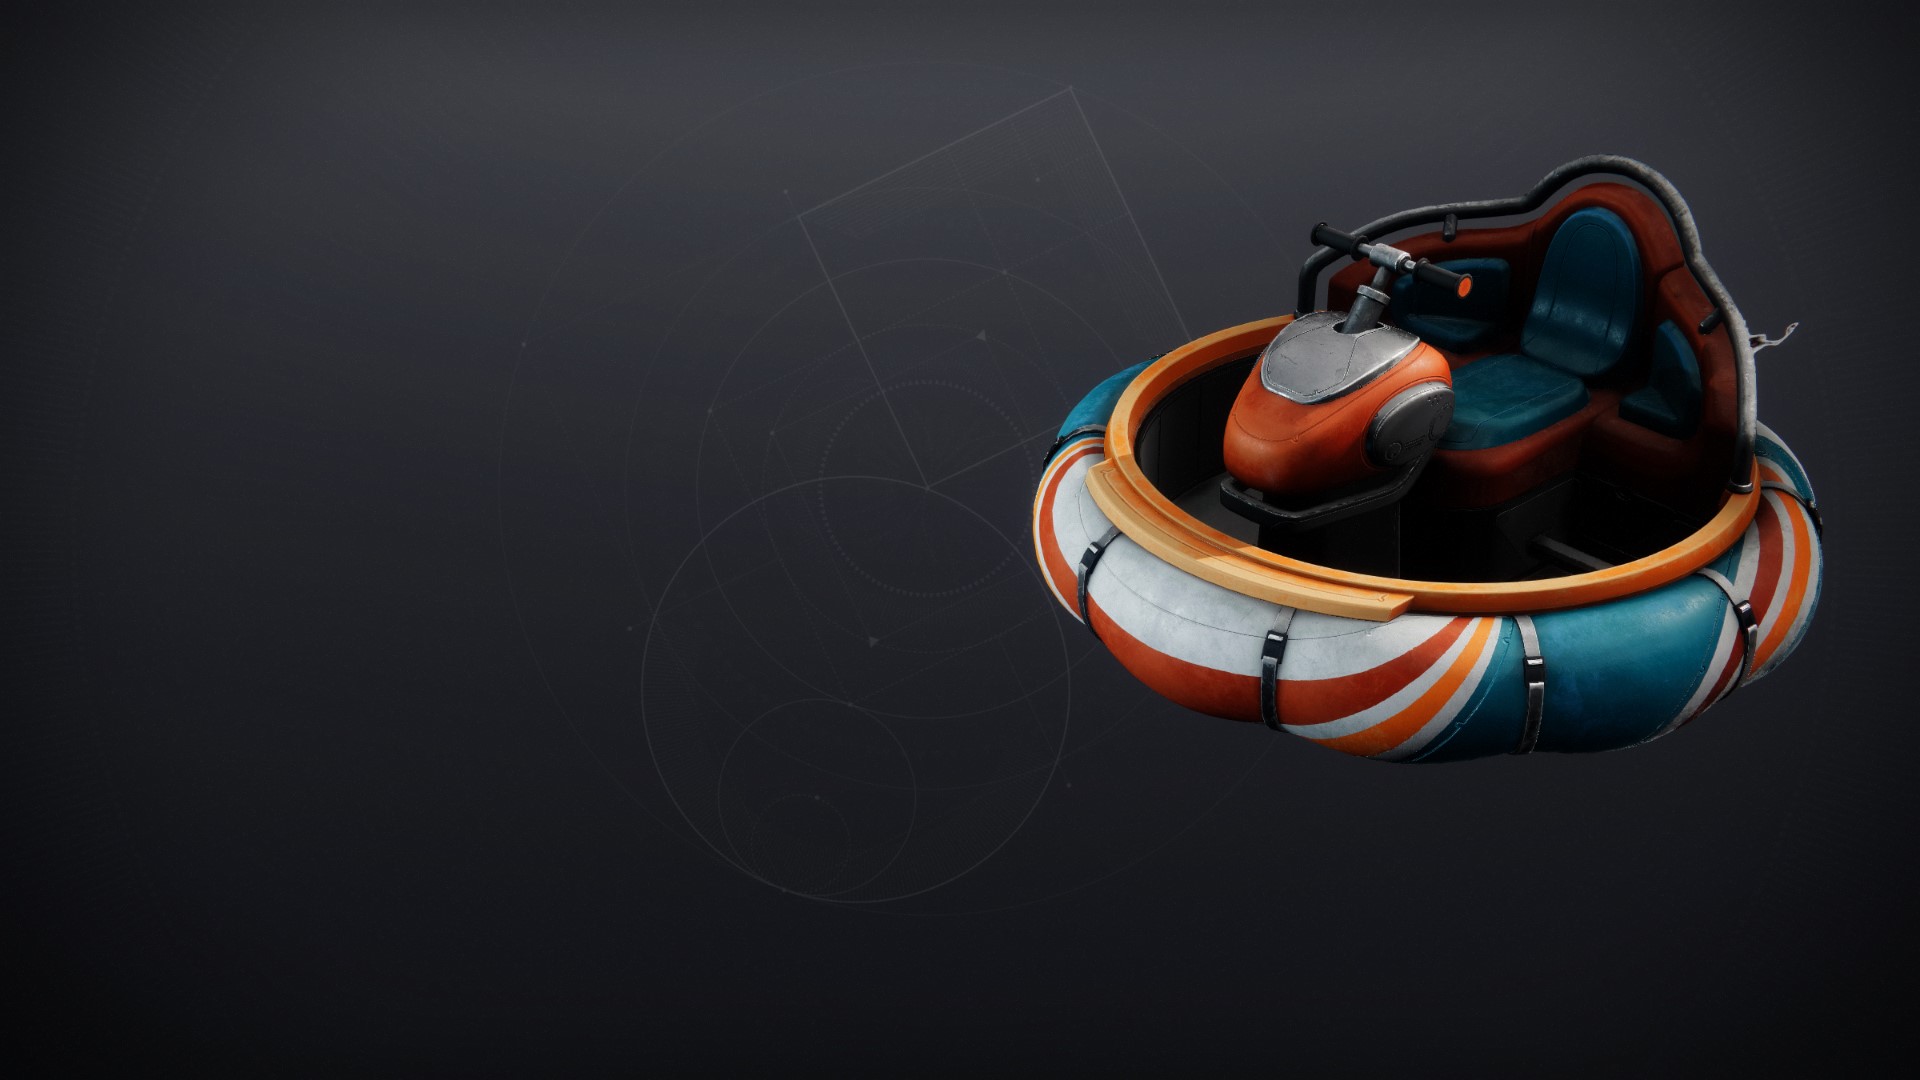 An in-game render of the Bumper Boat.